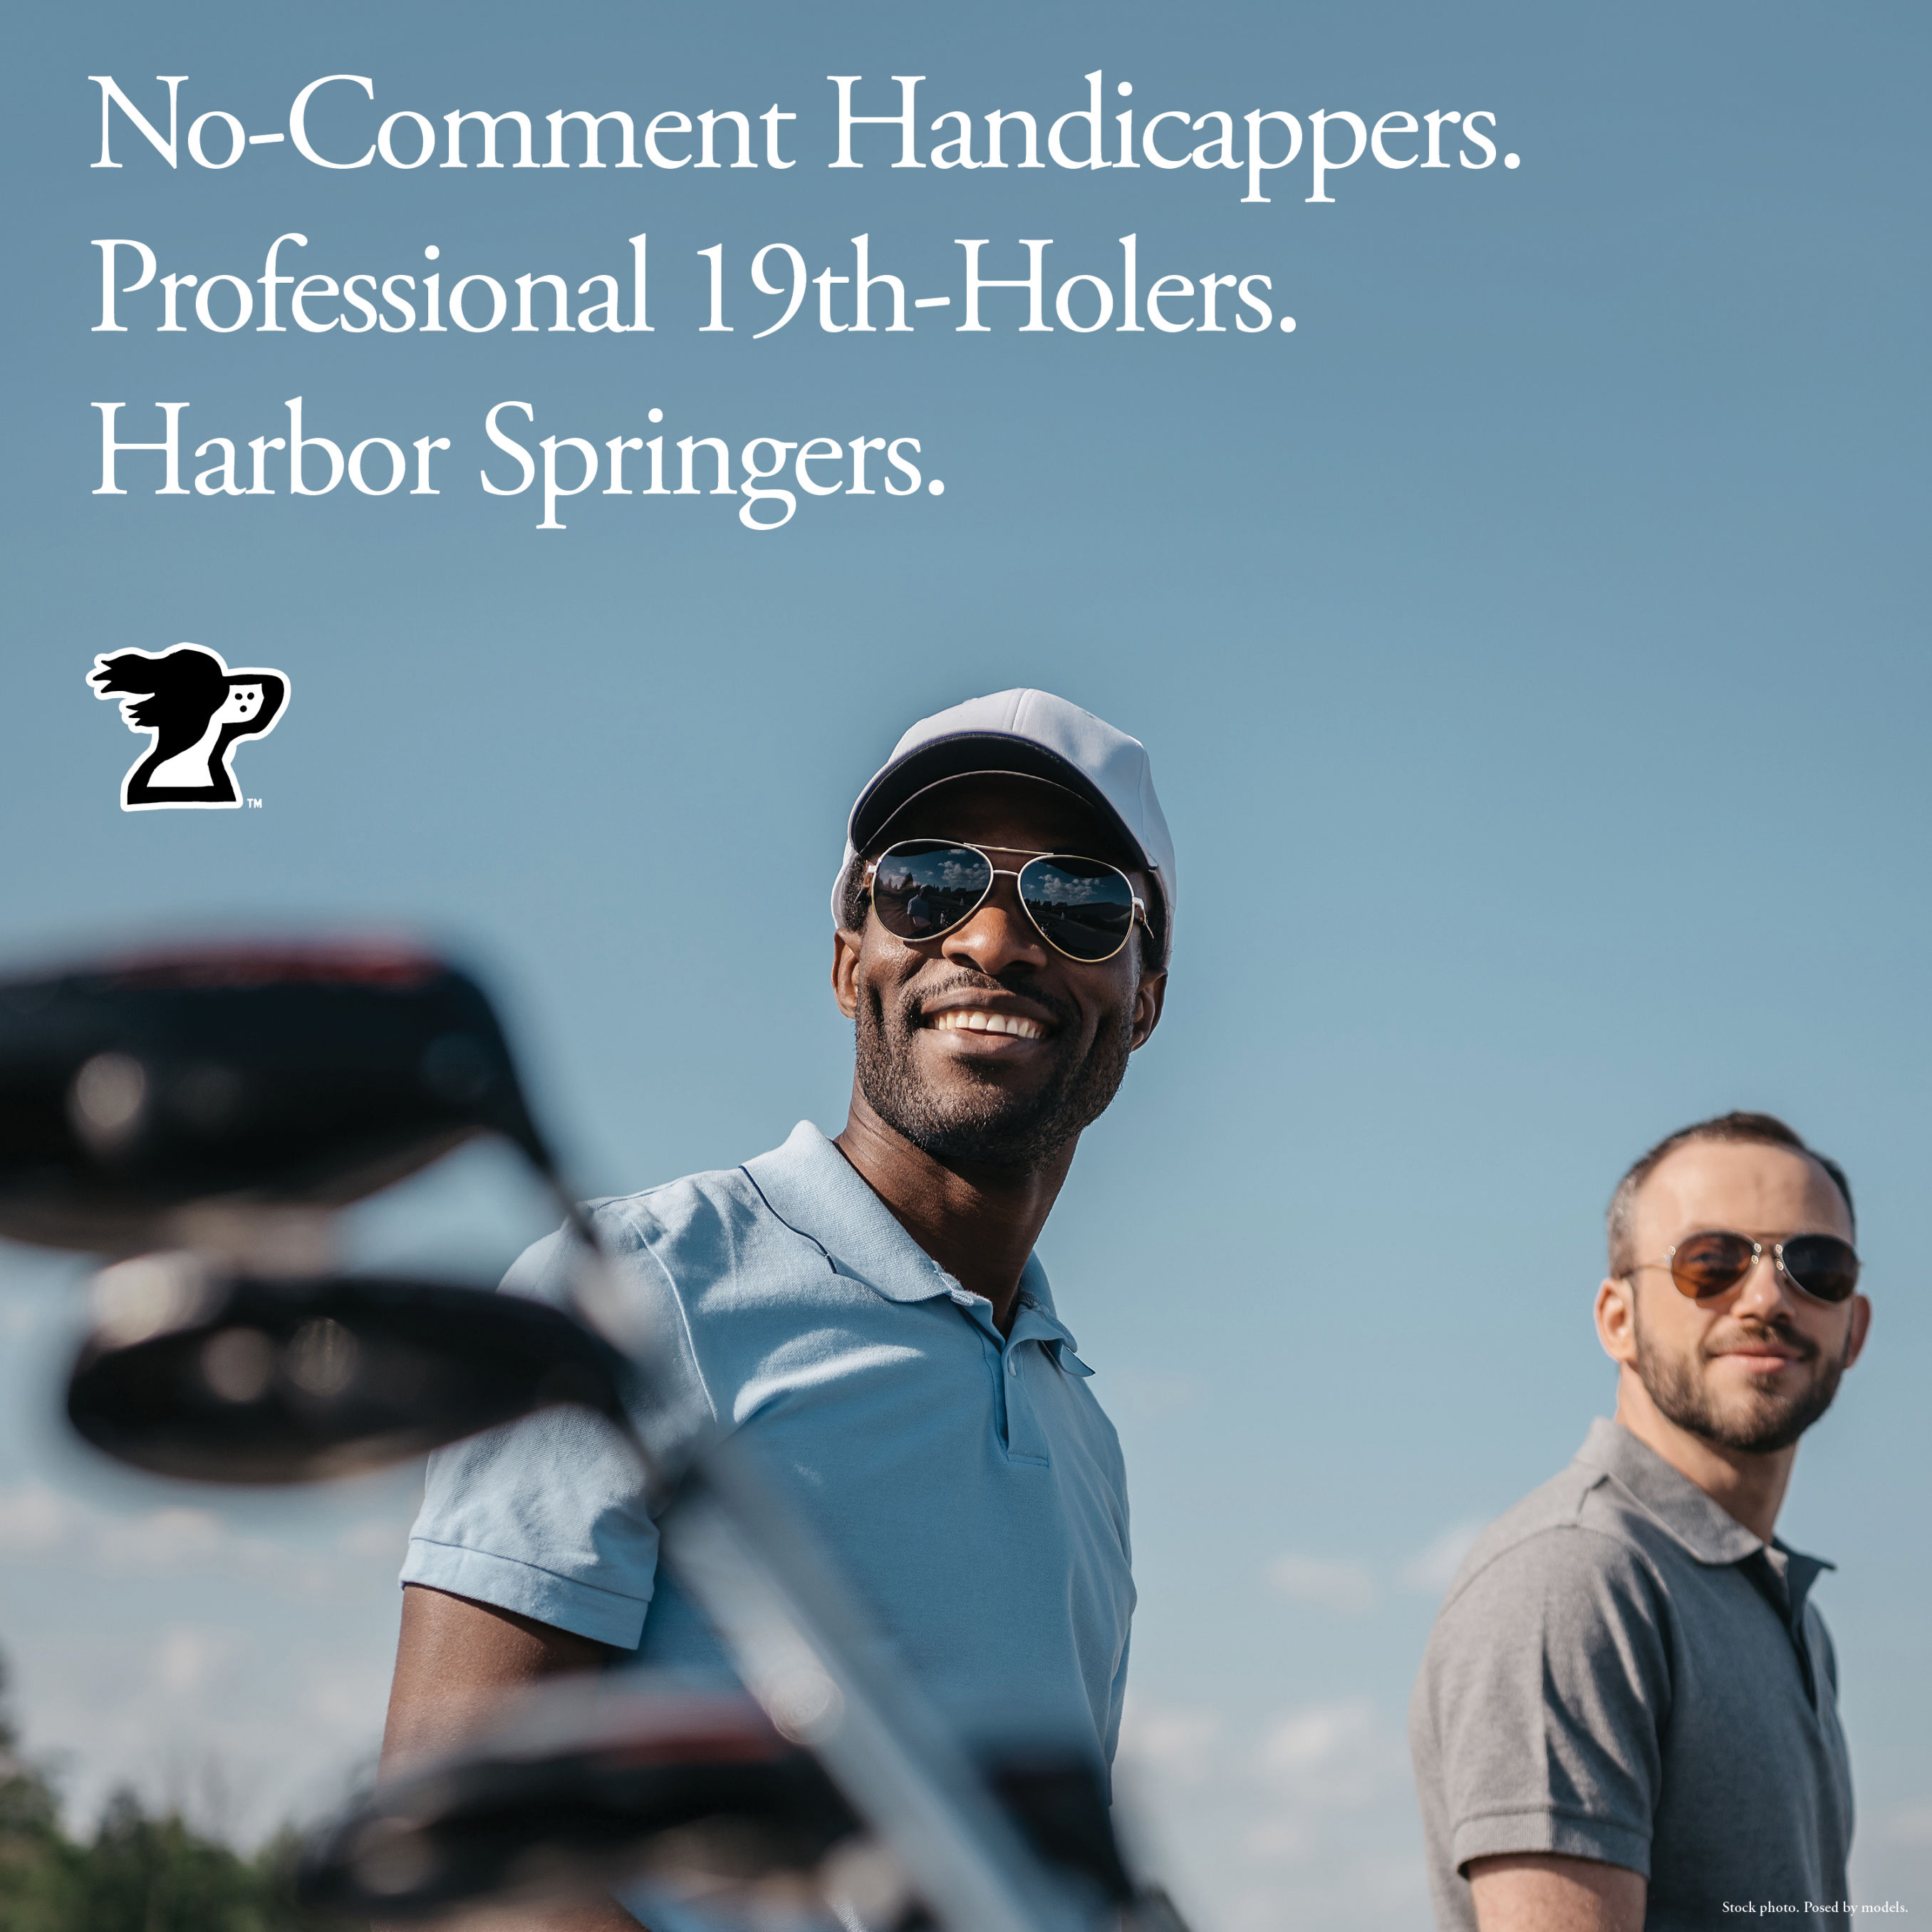 Picture of men golfing from Harbor Springer, a Harbor Springs, Michigan clothing store.